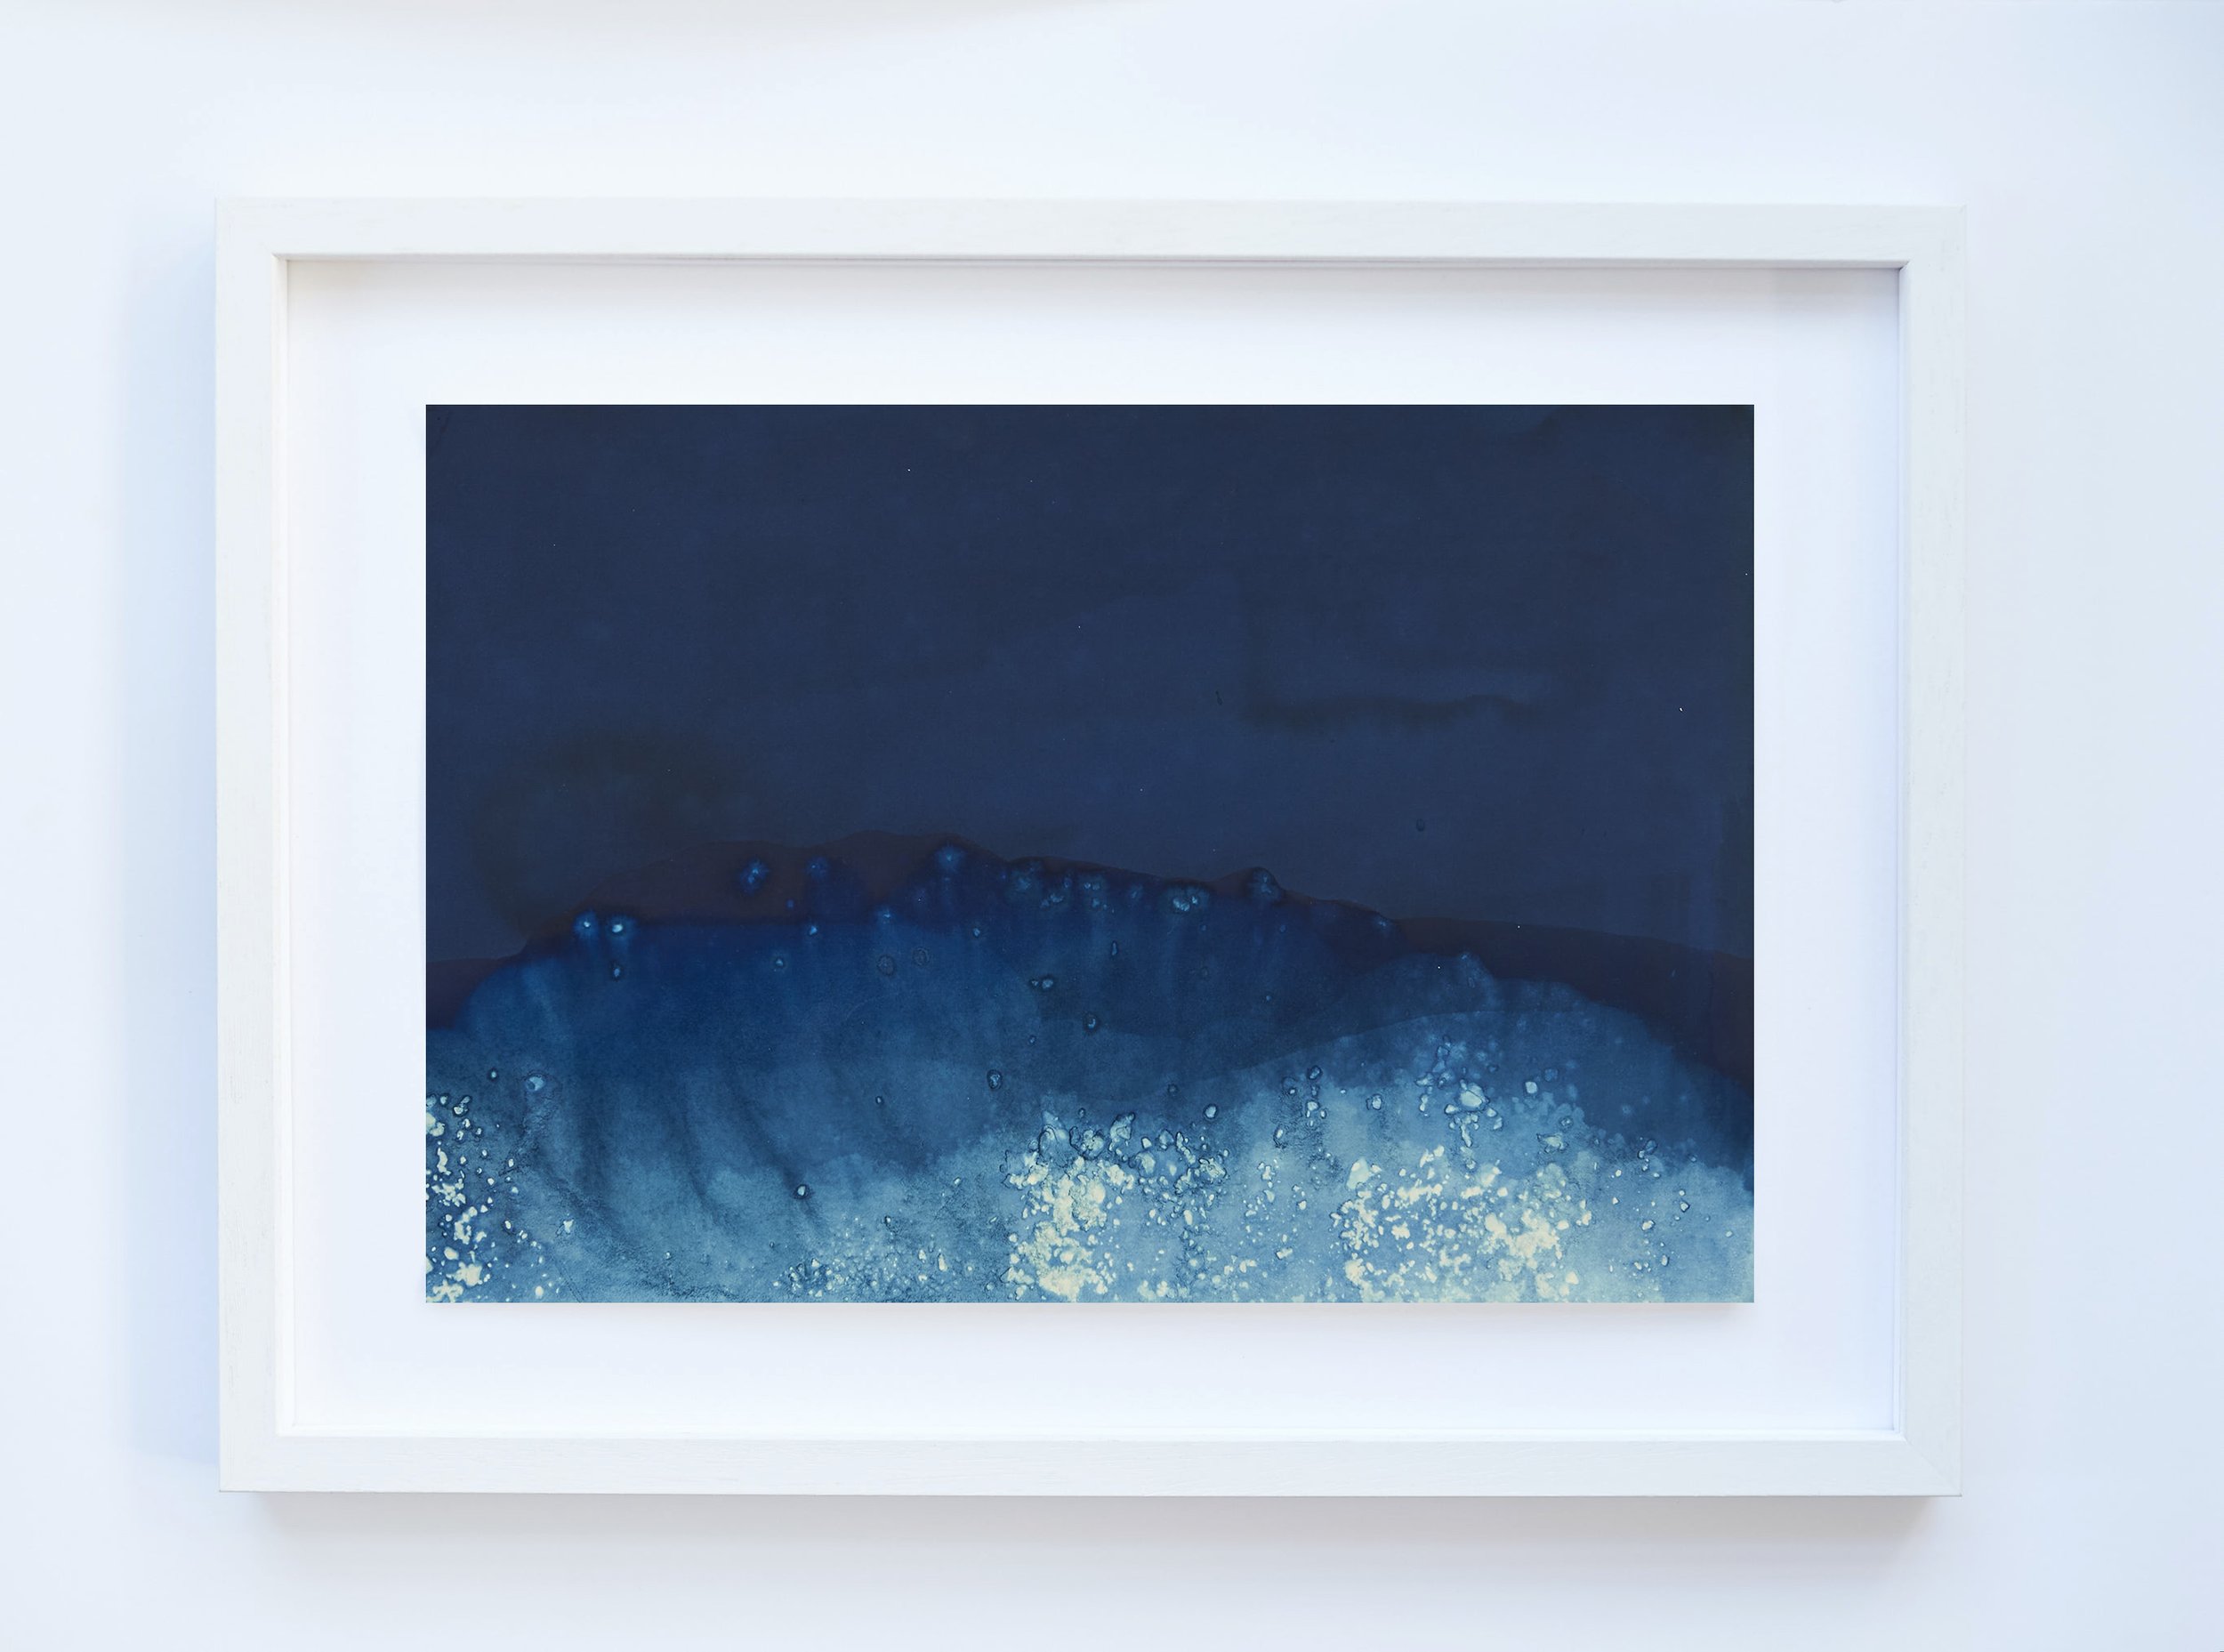  IL-Mainporth-2020-016 Cyanotype on paper  Print 12x18in  Framed 17x23in 